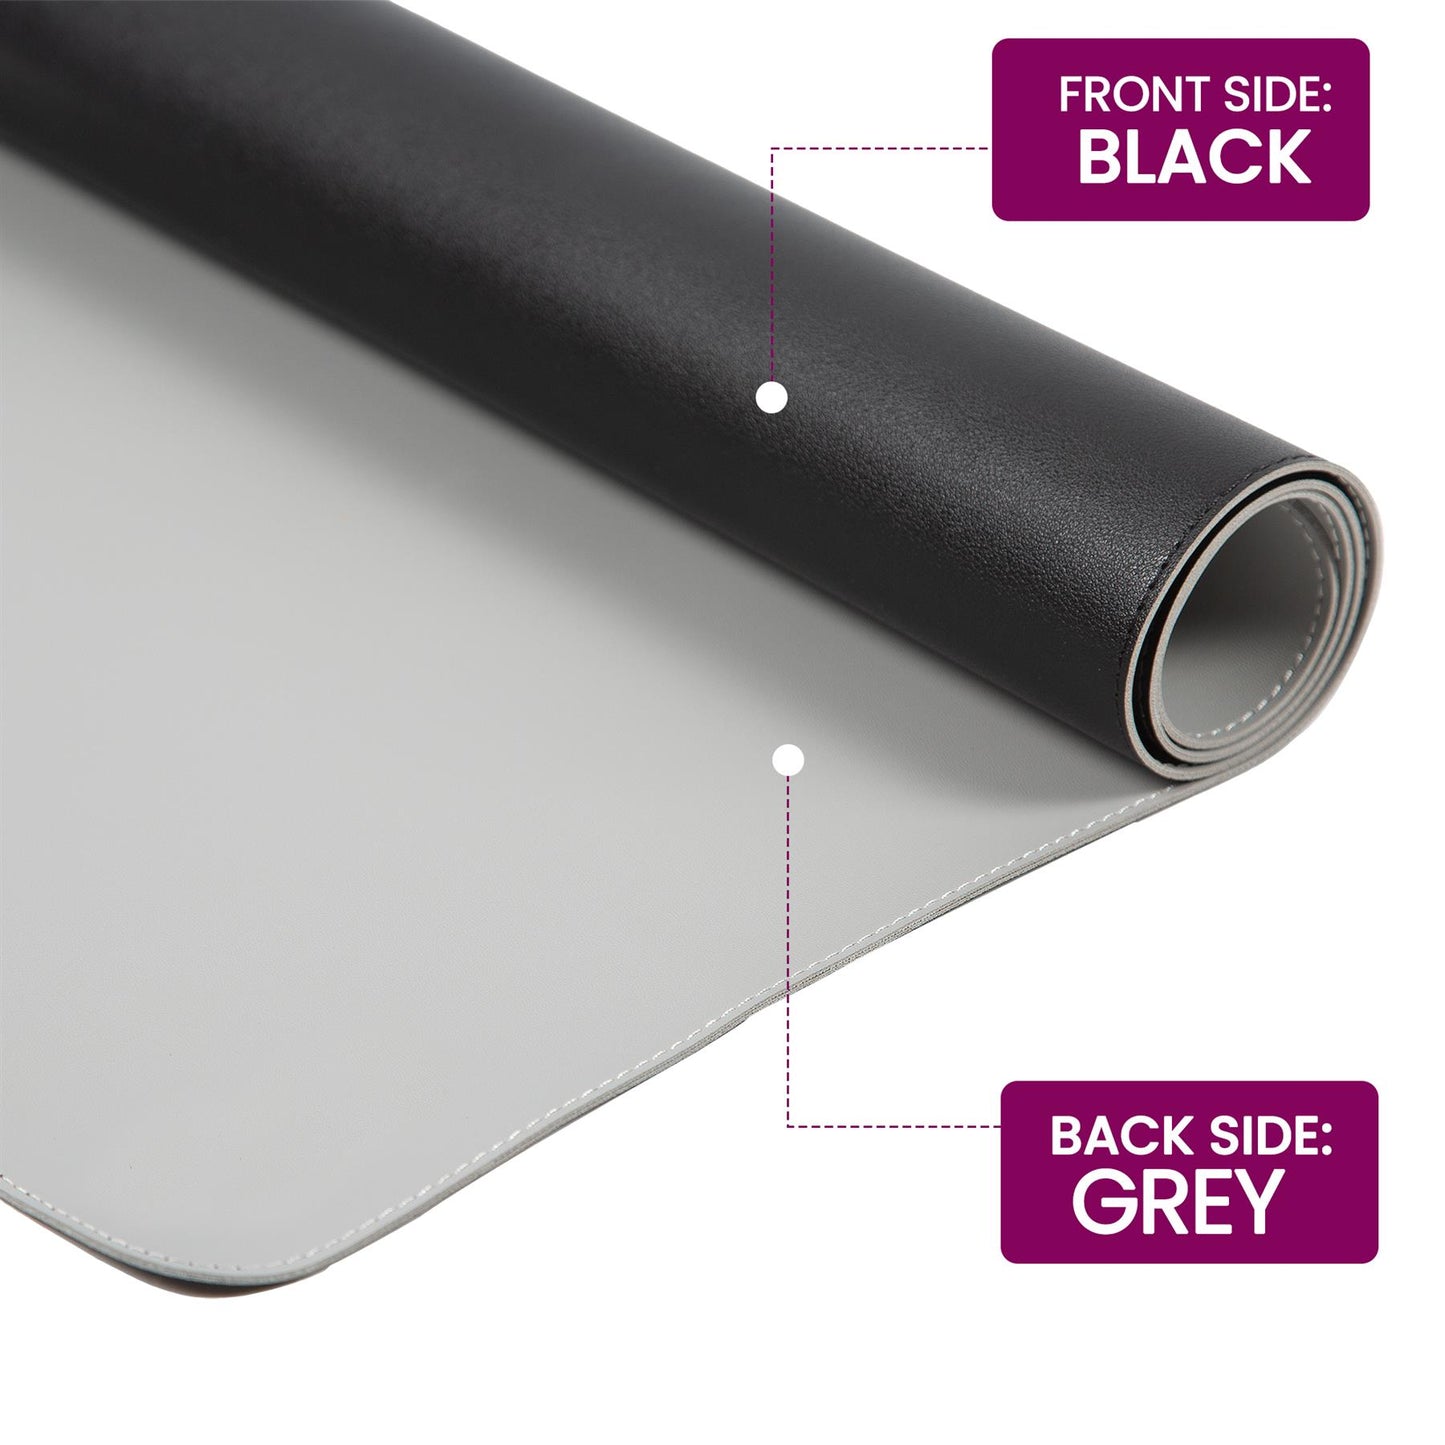 Large Double Sided PVC Desk Mat Black/Grey Workspace Protection